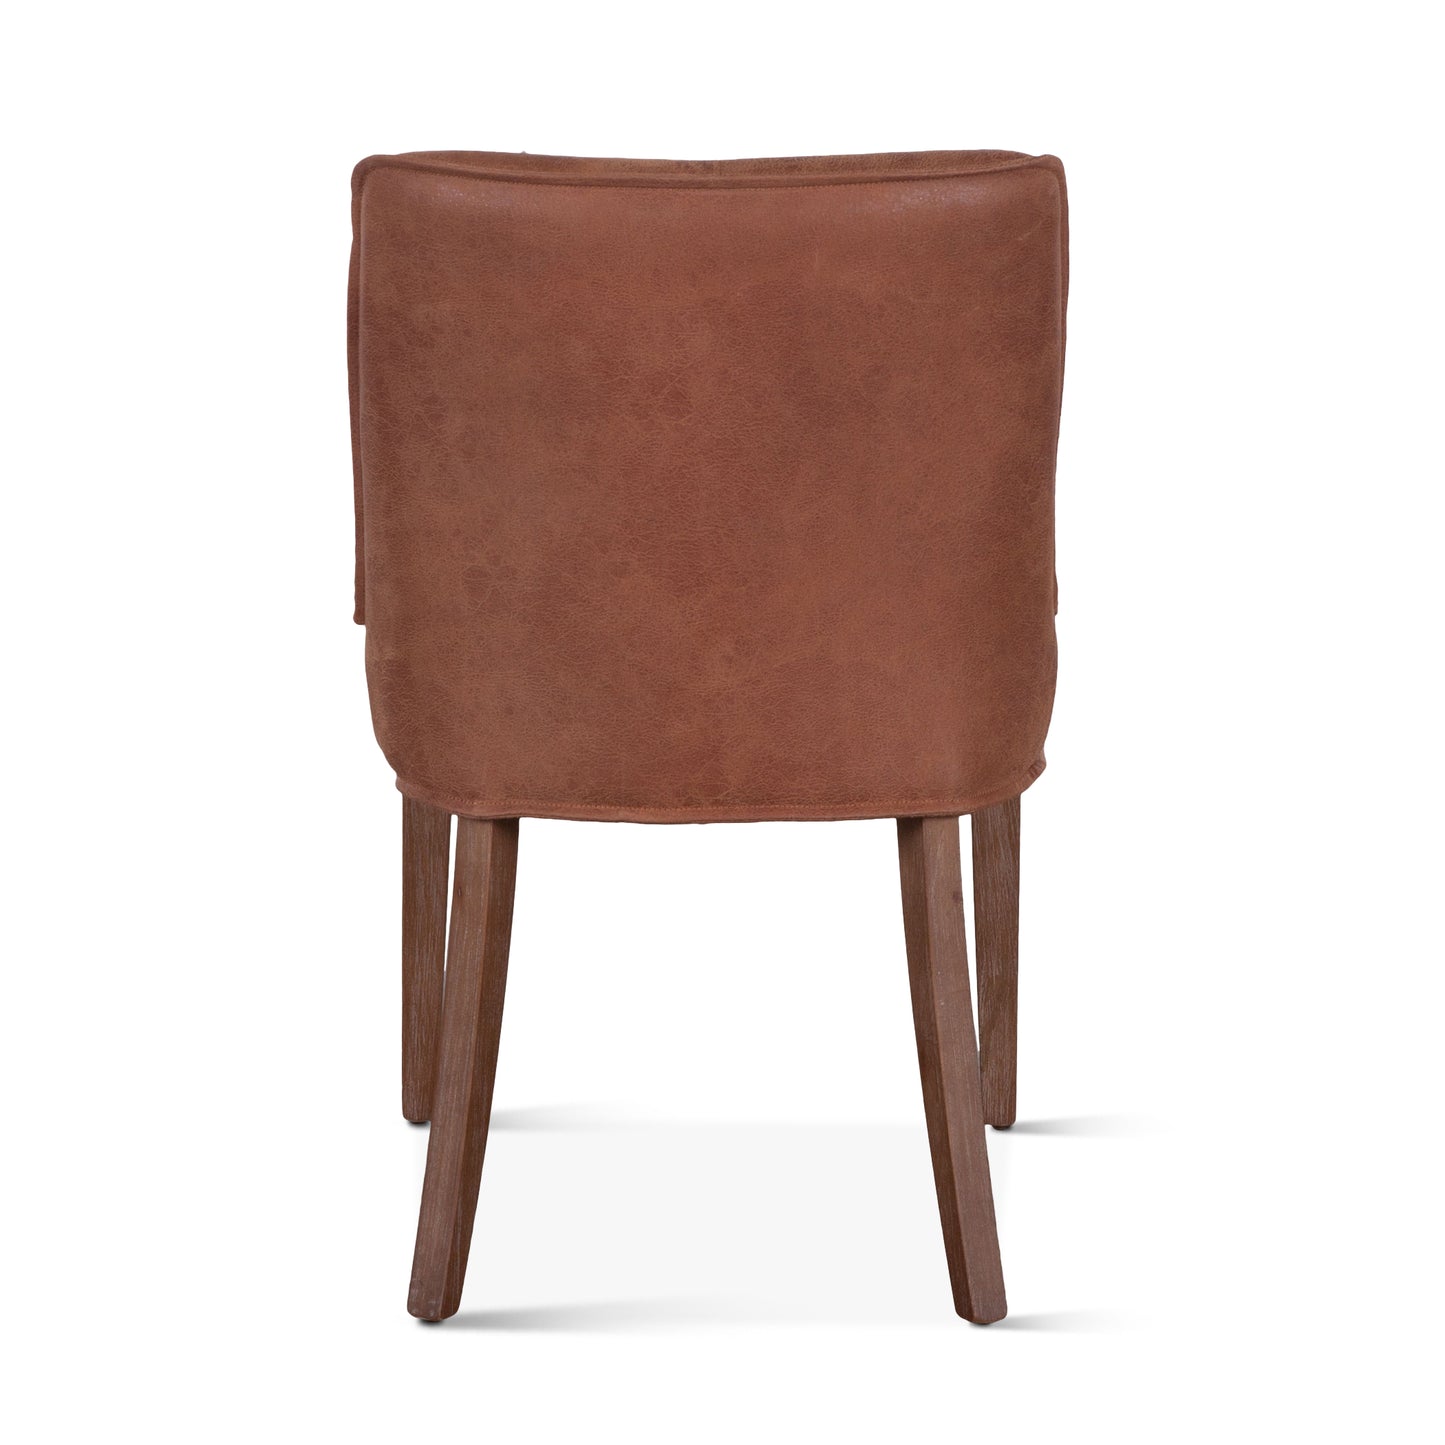 Buddy Side Chair Tan Leather